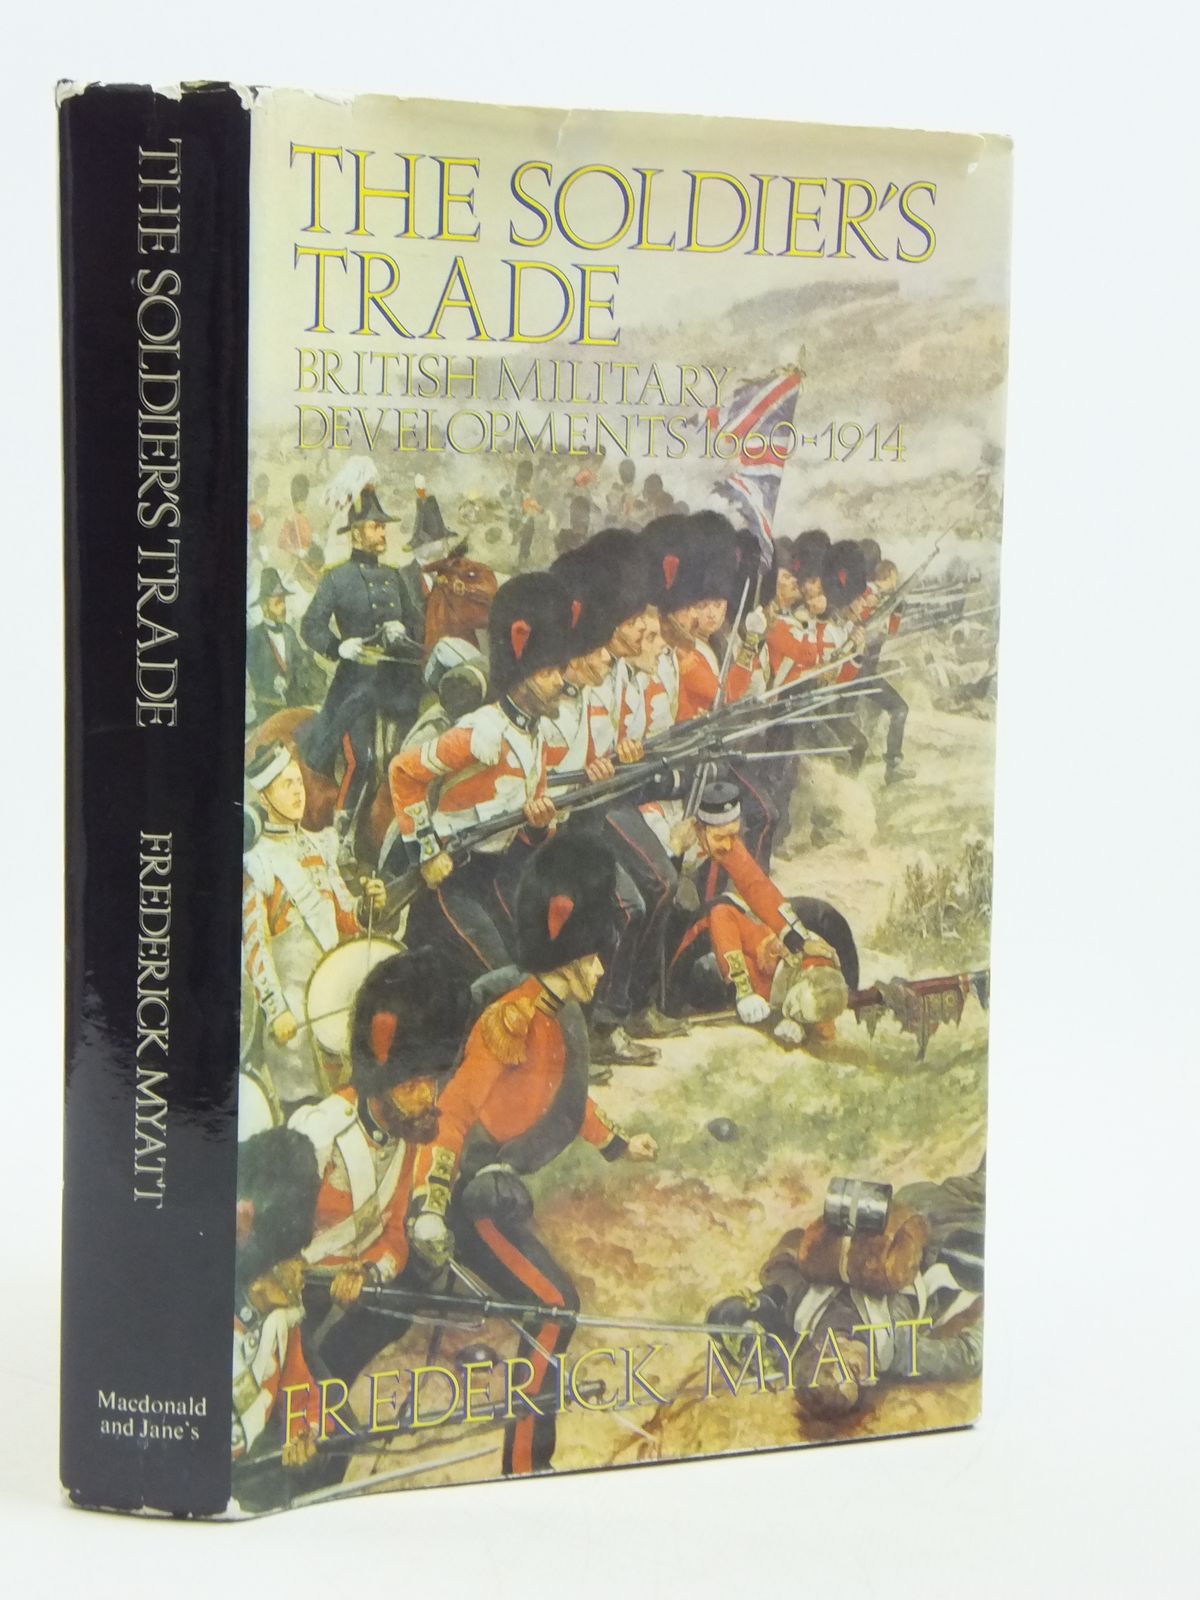 Photo of THE SOLDIER'S TRADE BRITISH MILITARY DEVELOPMENTS 1660-1914 written by Myatt, Frederick published by Macdonald and Jane's (STOCK CODE: 2110718)  for sale by Stella & Rose's Books